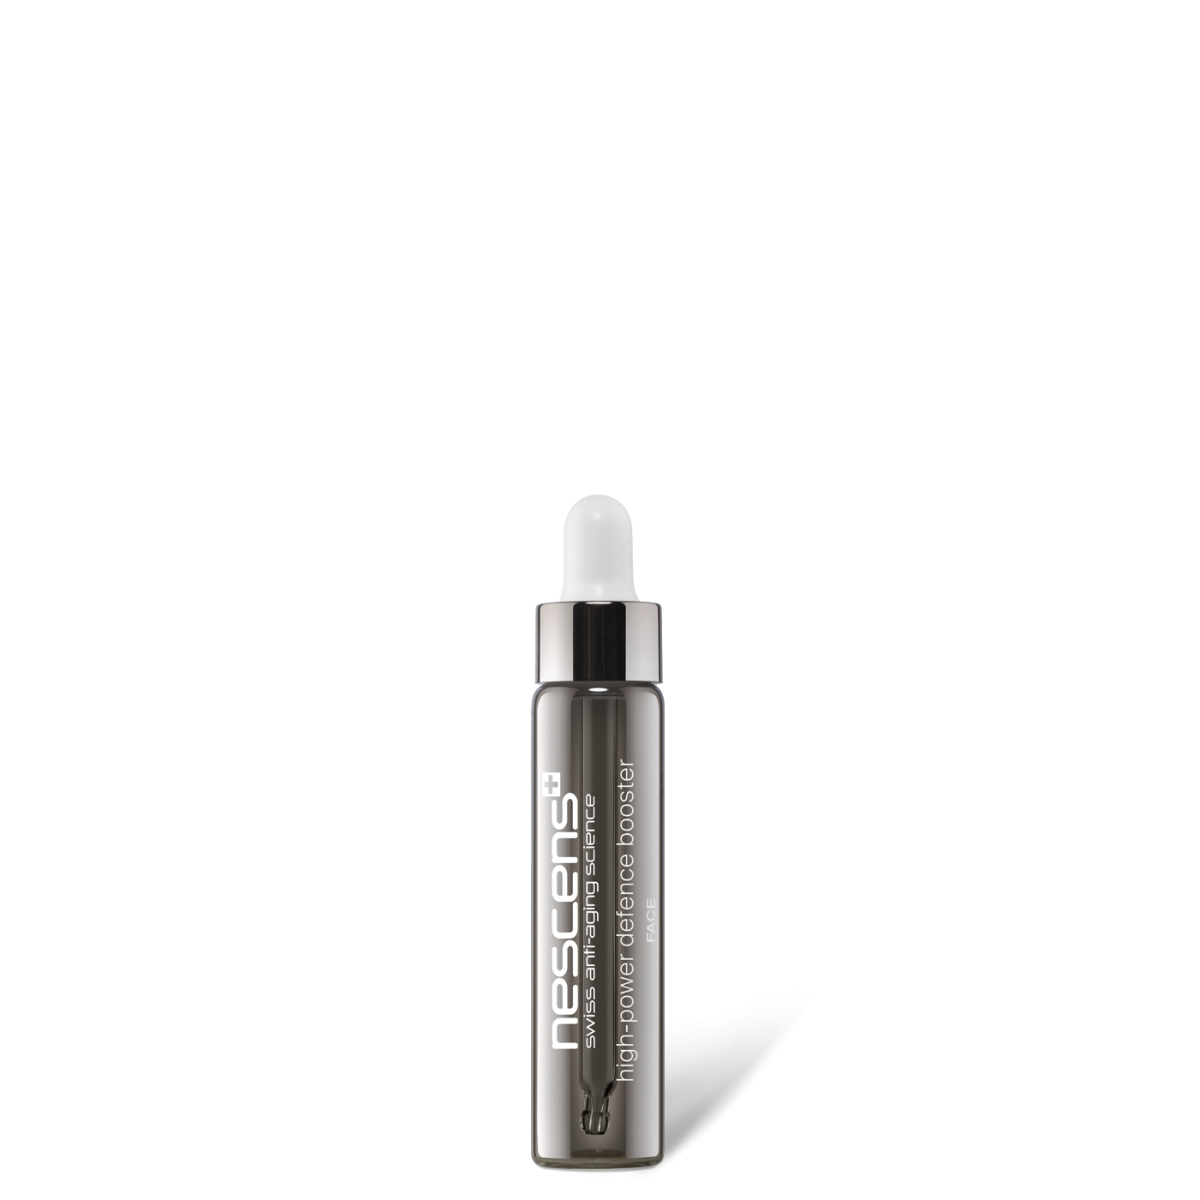 This High Power Defence Booster is a barrier against the effects of blue light, UV rays and premature appearances of wrinkles